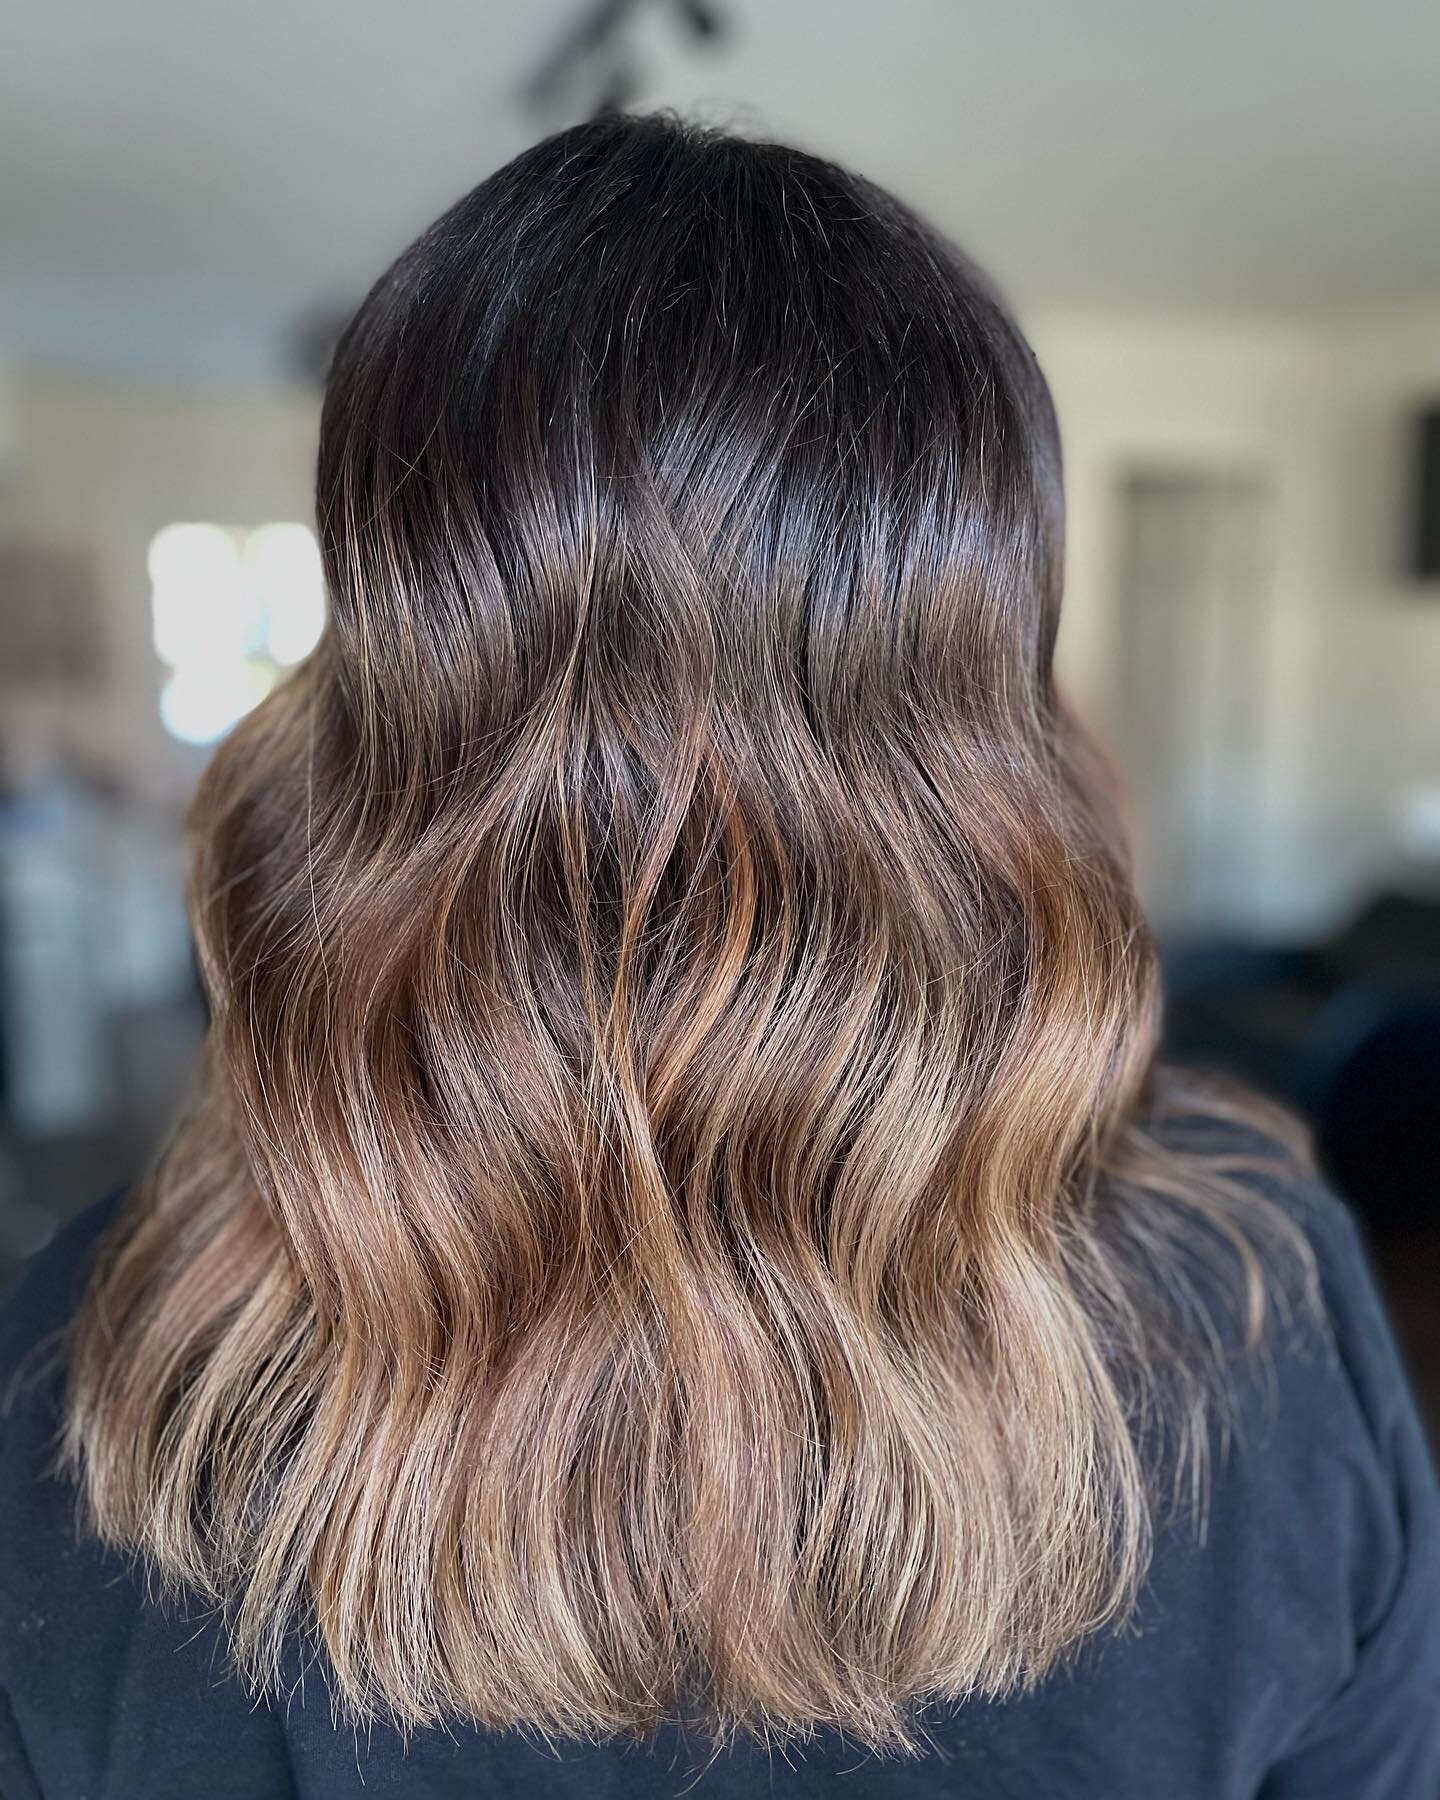 A little spring upgrade!
Kinda digging the soft ombr&eacute; vibes🤭

Swipe for before📸
#CThair #cthairsalon #ctdimensionalcolor #colormelt #ctlivedincolor